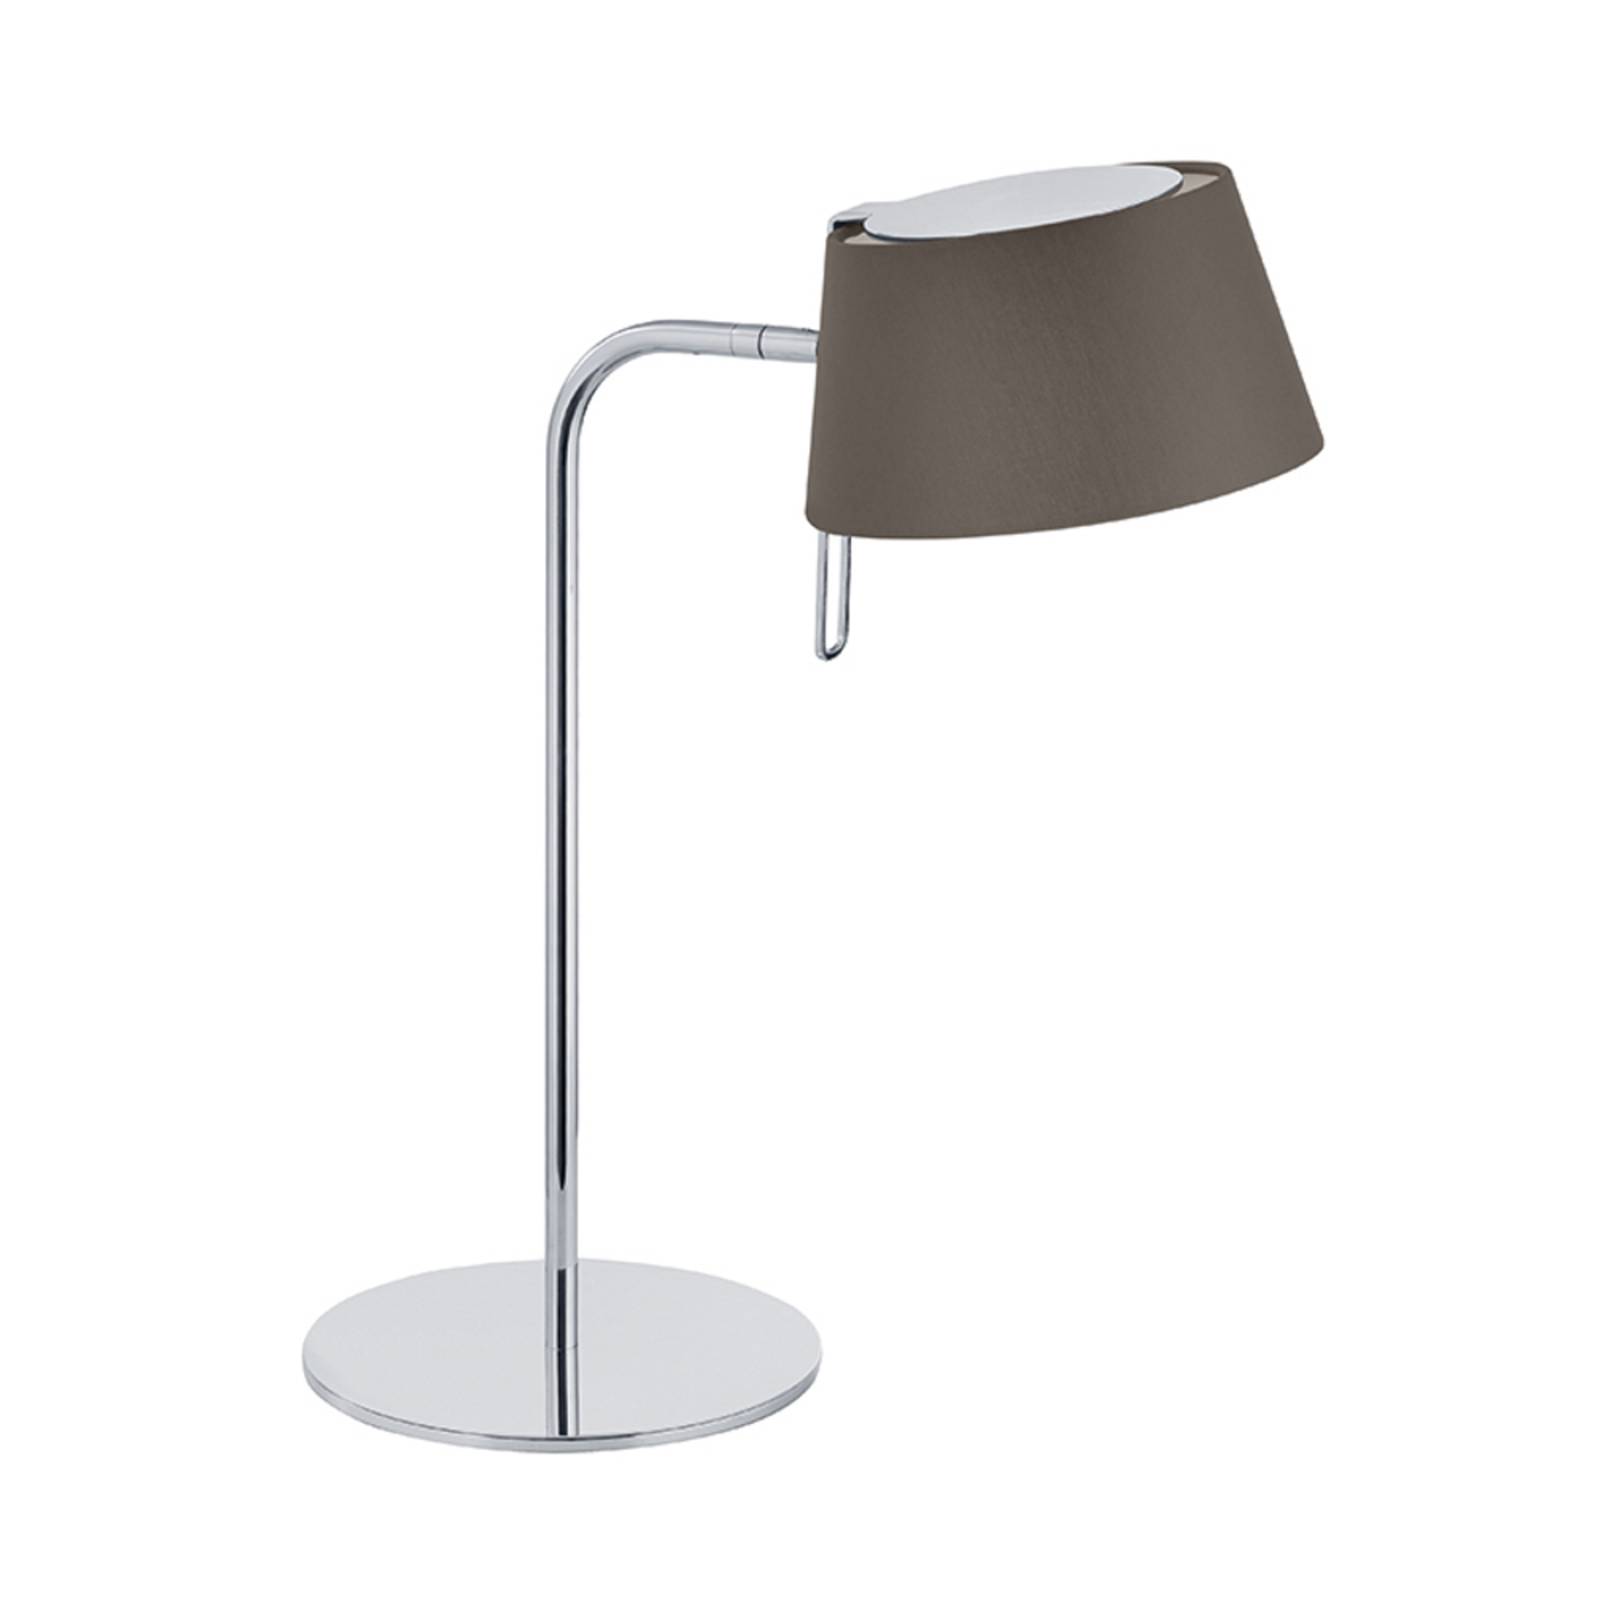 Image of BRUMBERG 58126150 lampe à poser, inclinable 4251433920786